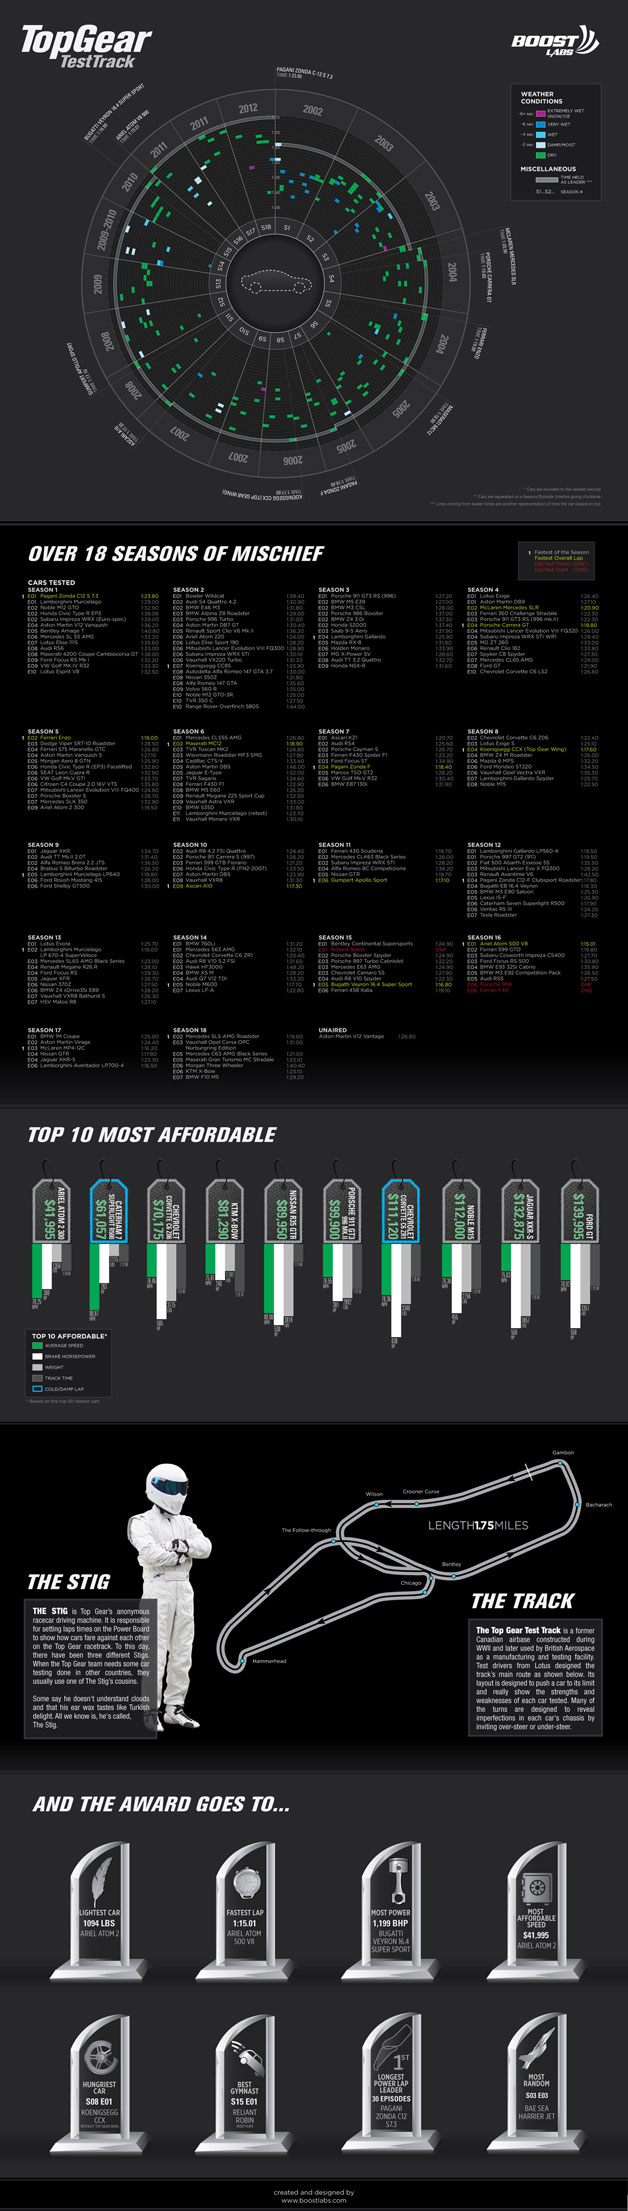 Top-Gear-Test-Track-infographic